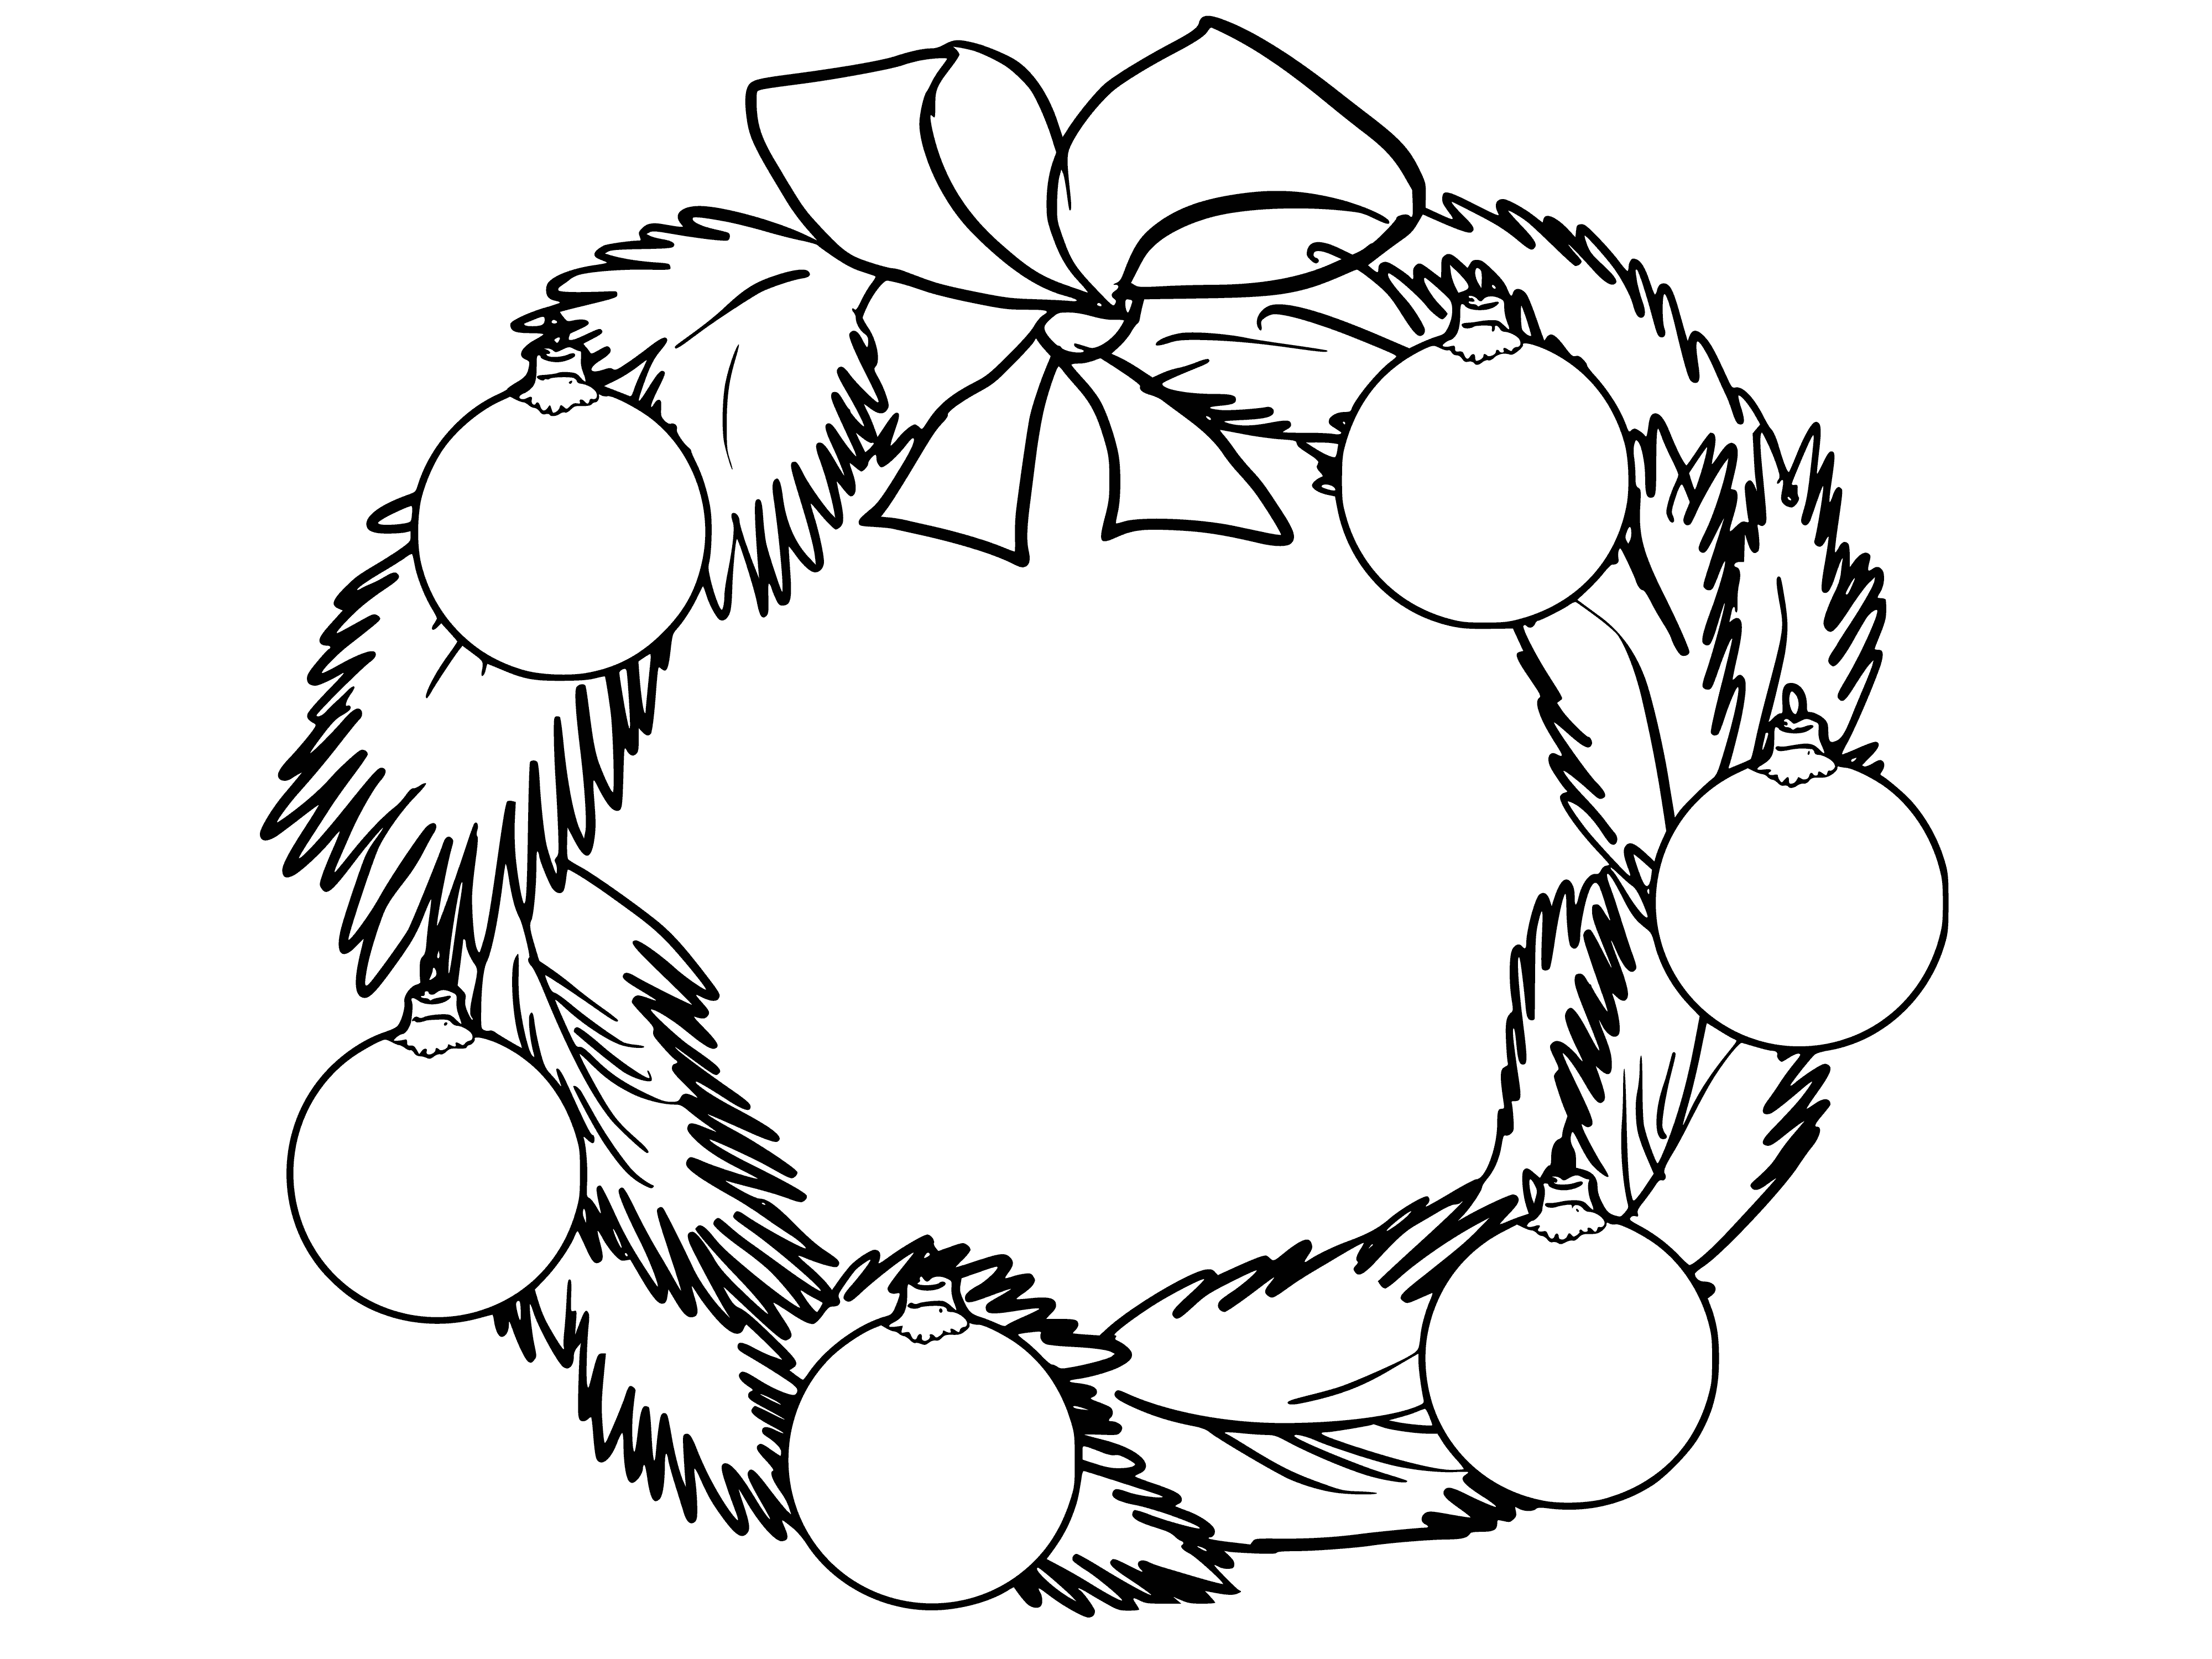 coloring page: Christmas wreath with red leaves, green leaves, and red berries. Finished with a red bow. #ChristmasDecor